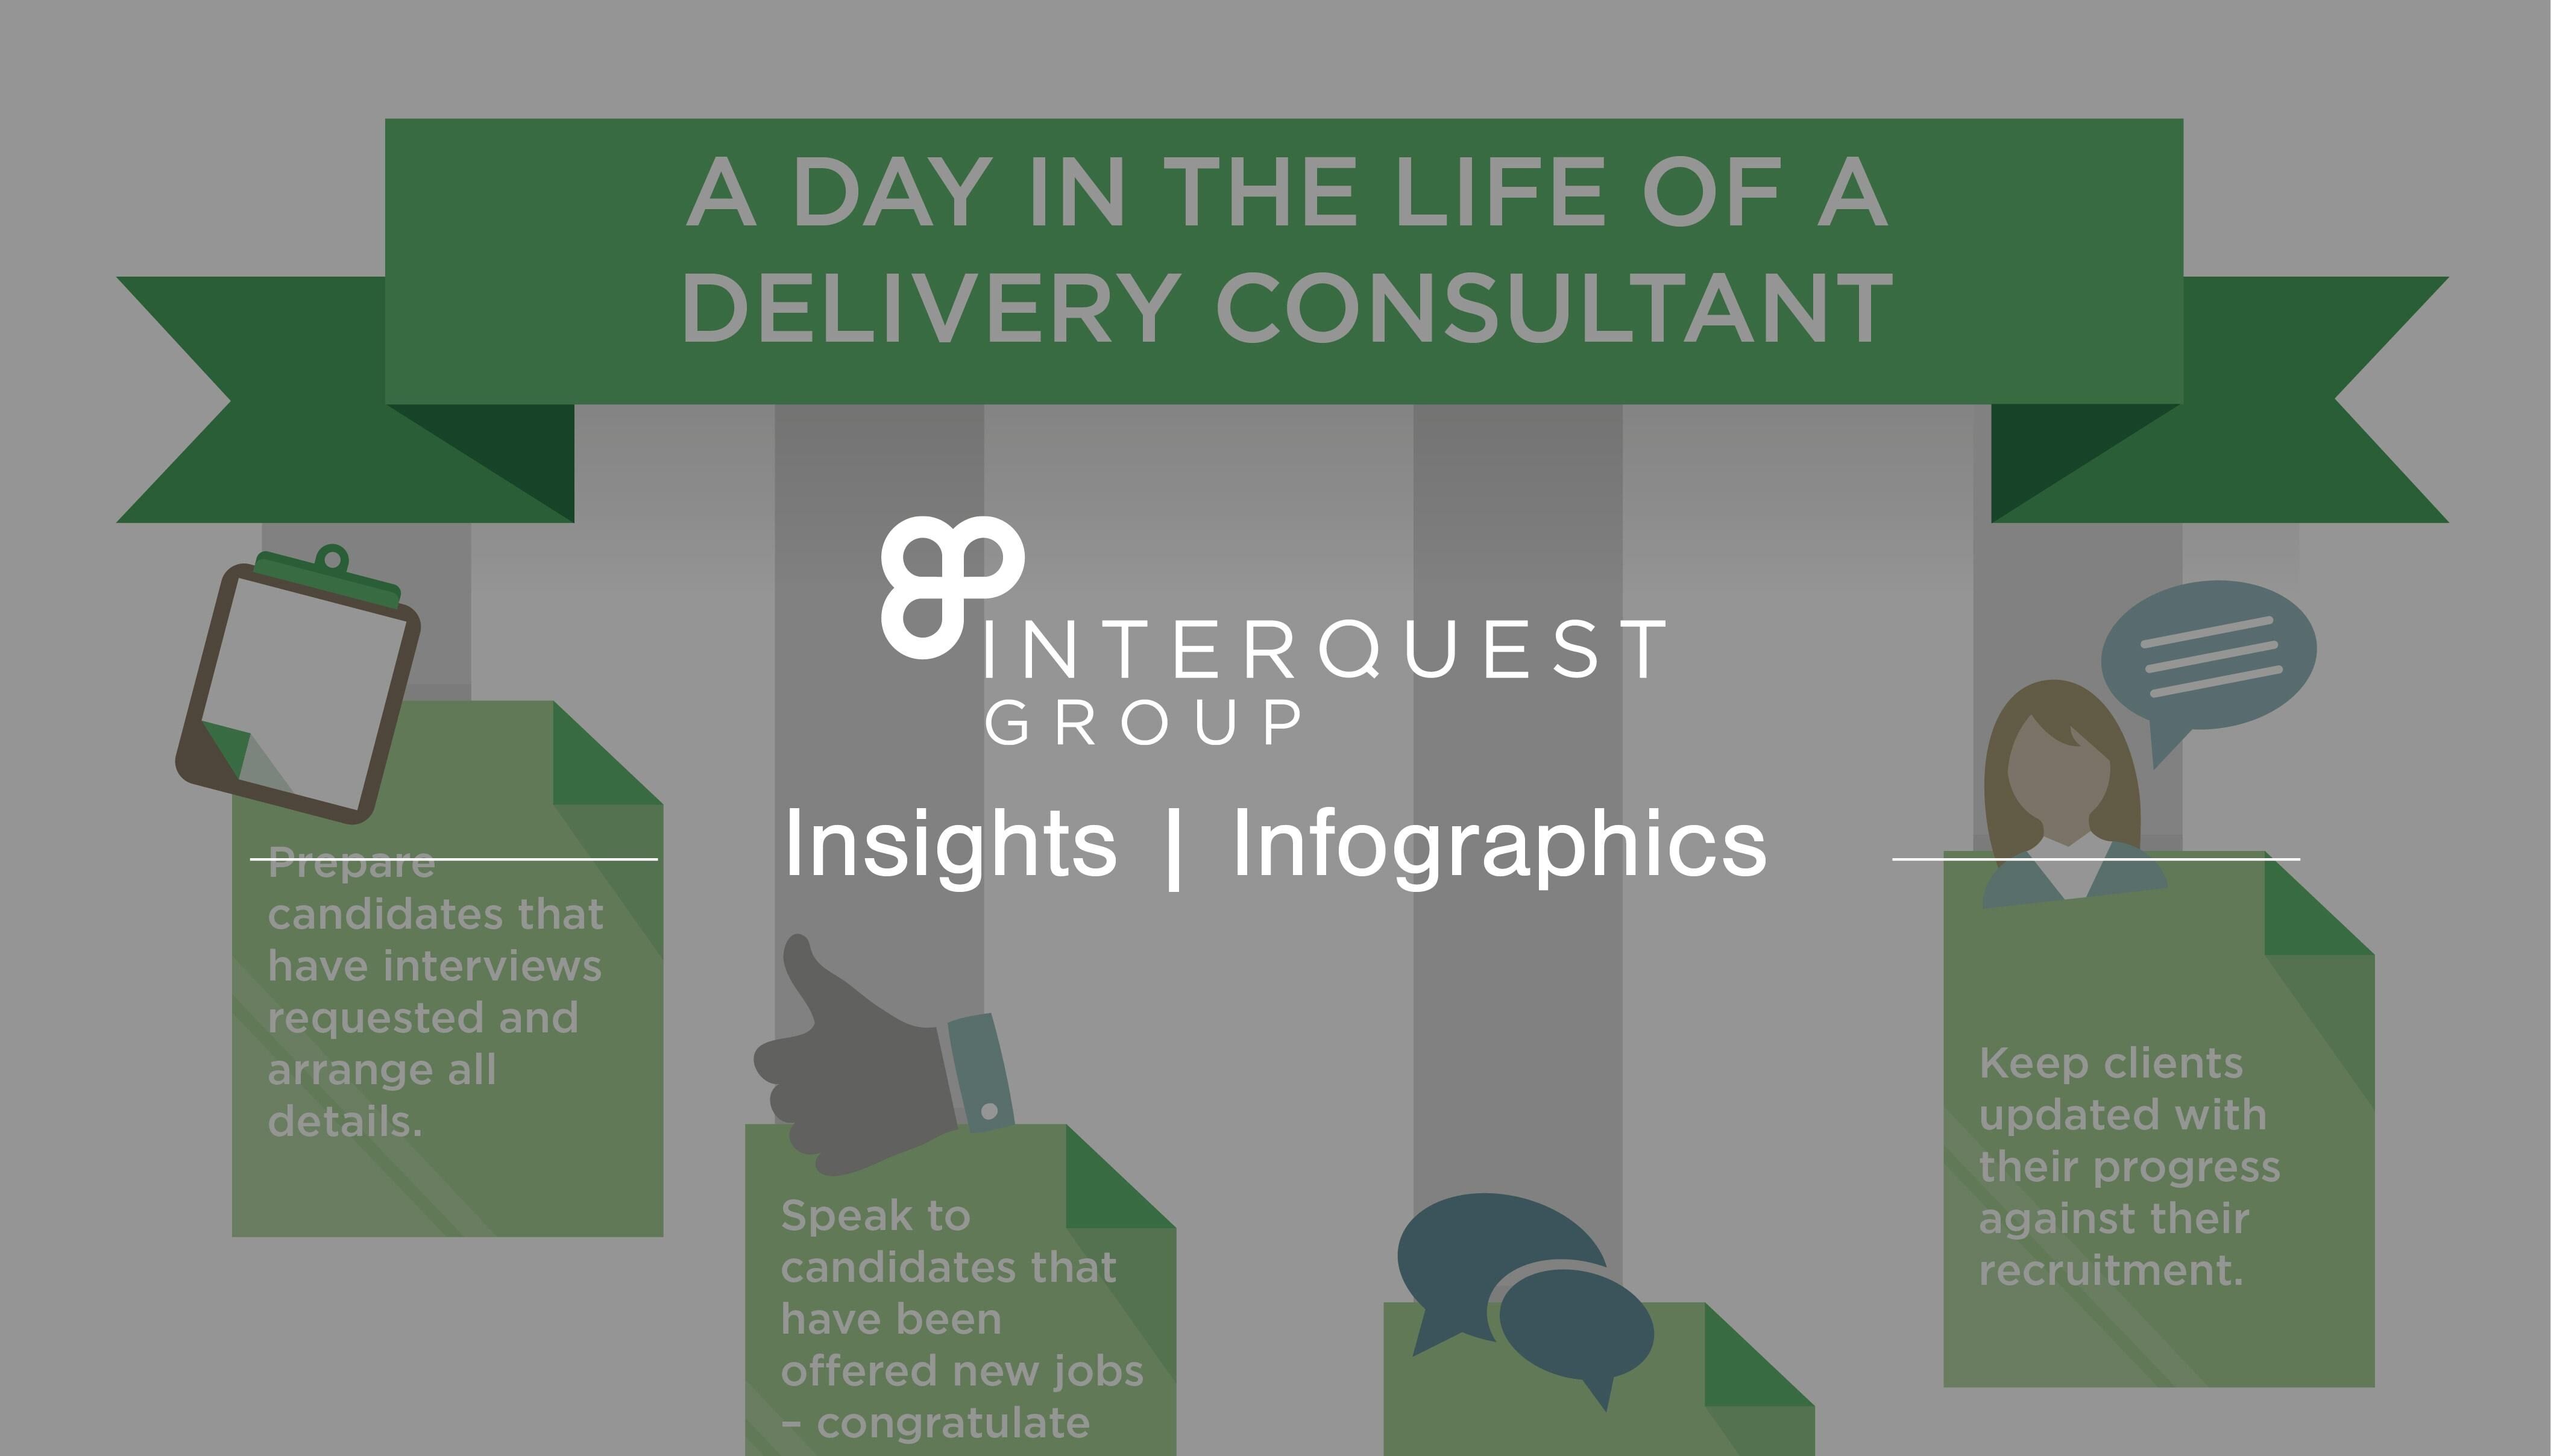 A day in the life of a delivery consultant infographic banner